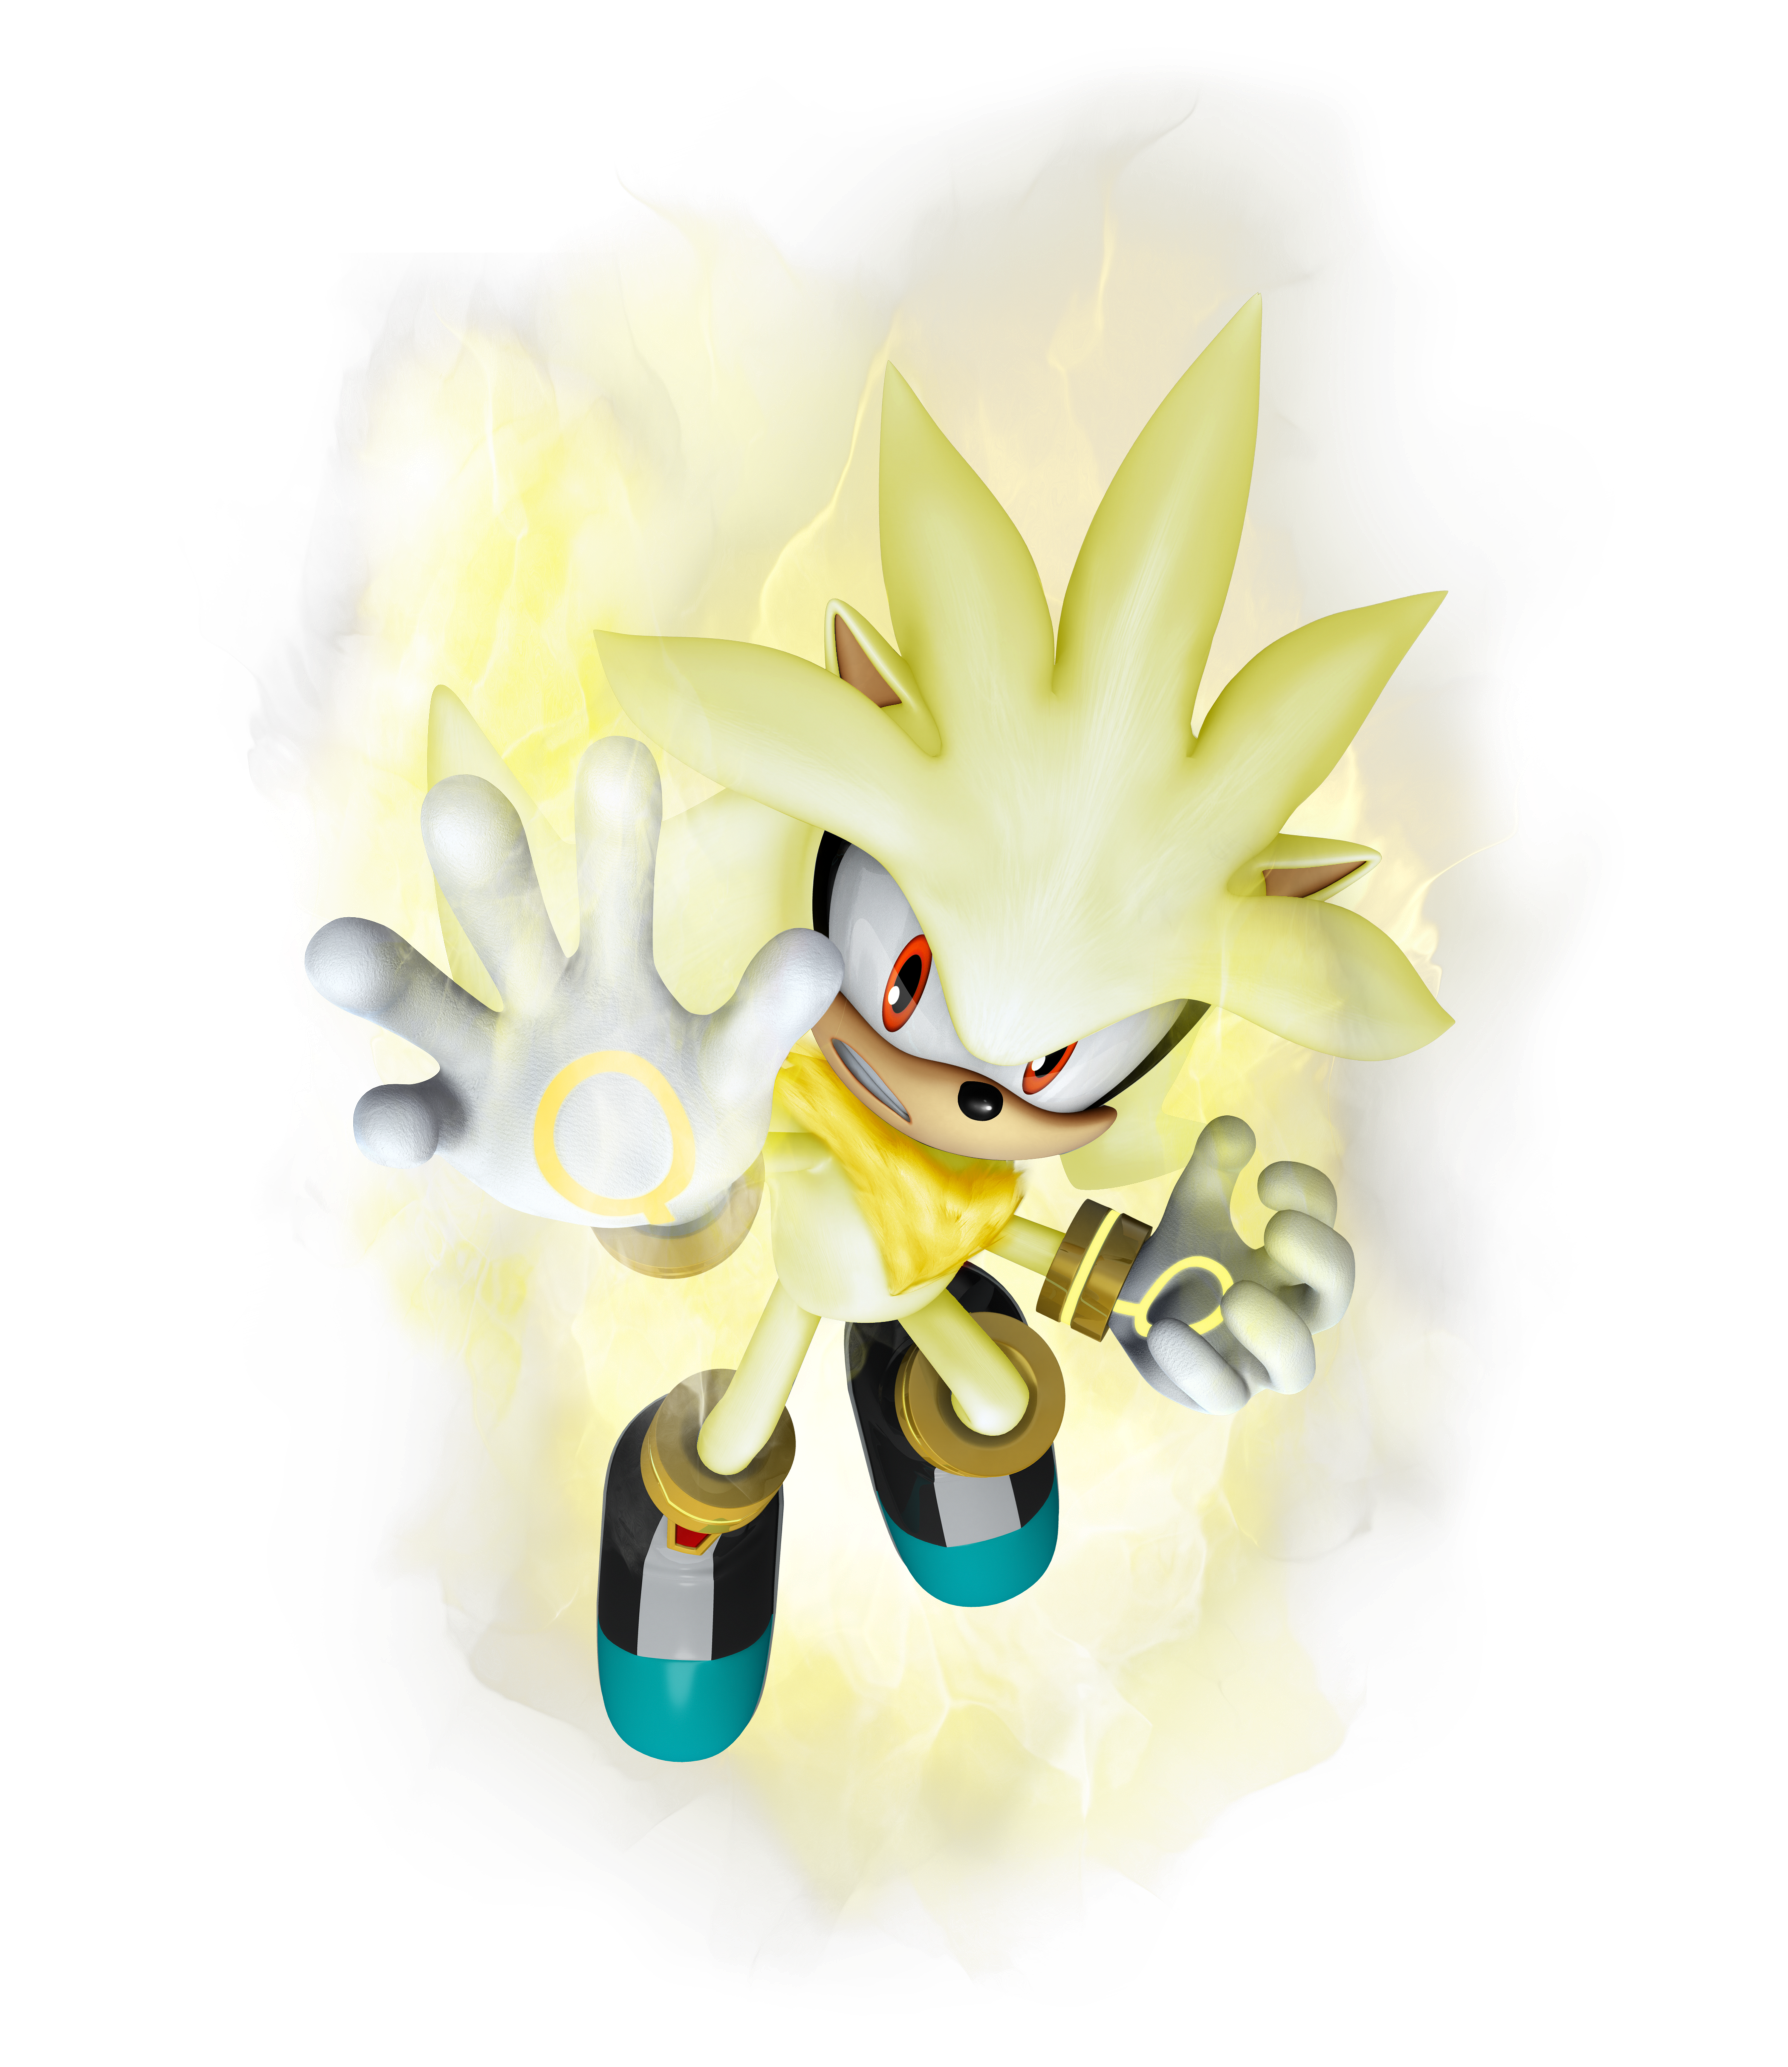 Silver the Hedgehog, Fictional Characters Wiki